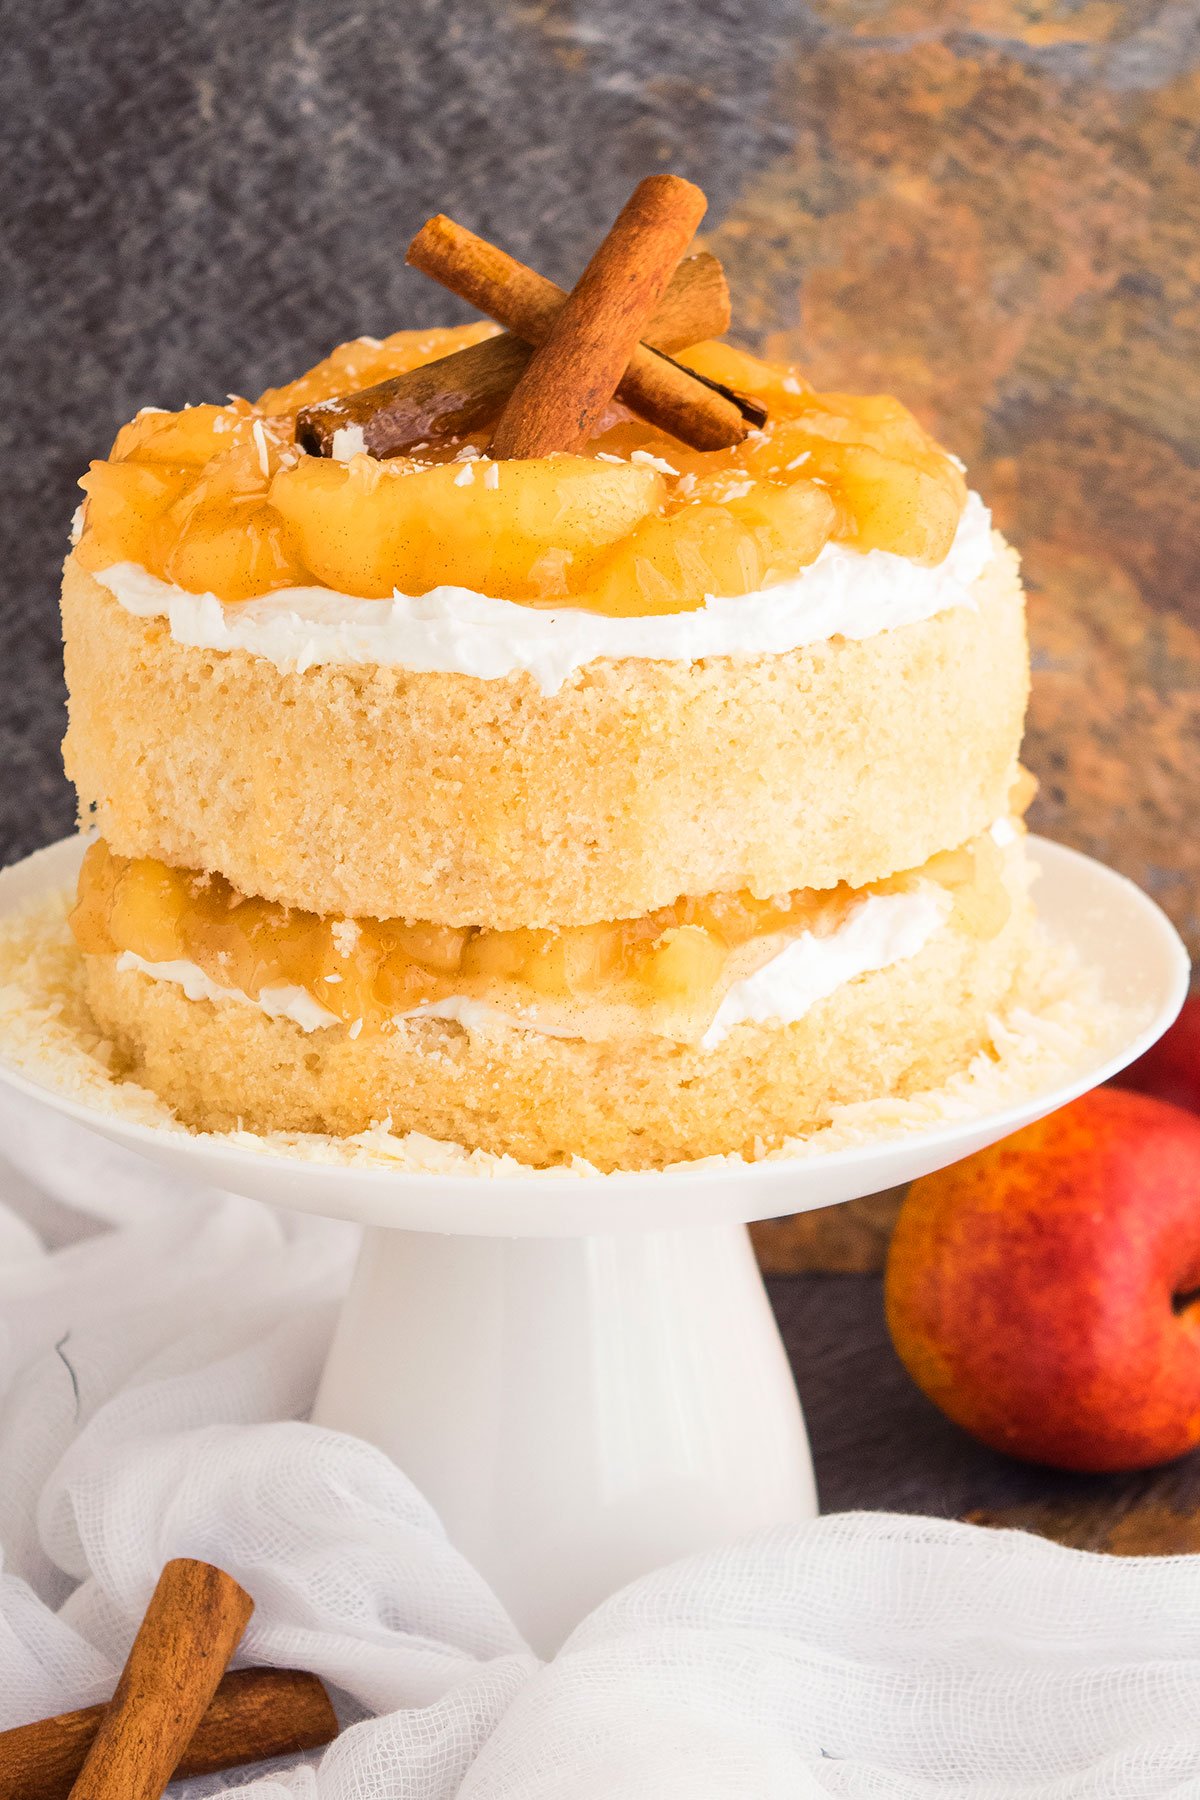 Easy Apple Pie Cake With Pie Filling and Buttercream Frosting on White Cake Stand